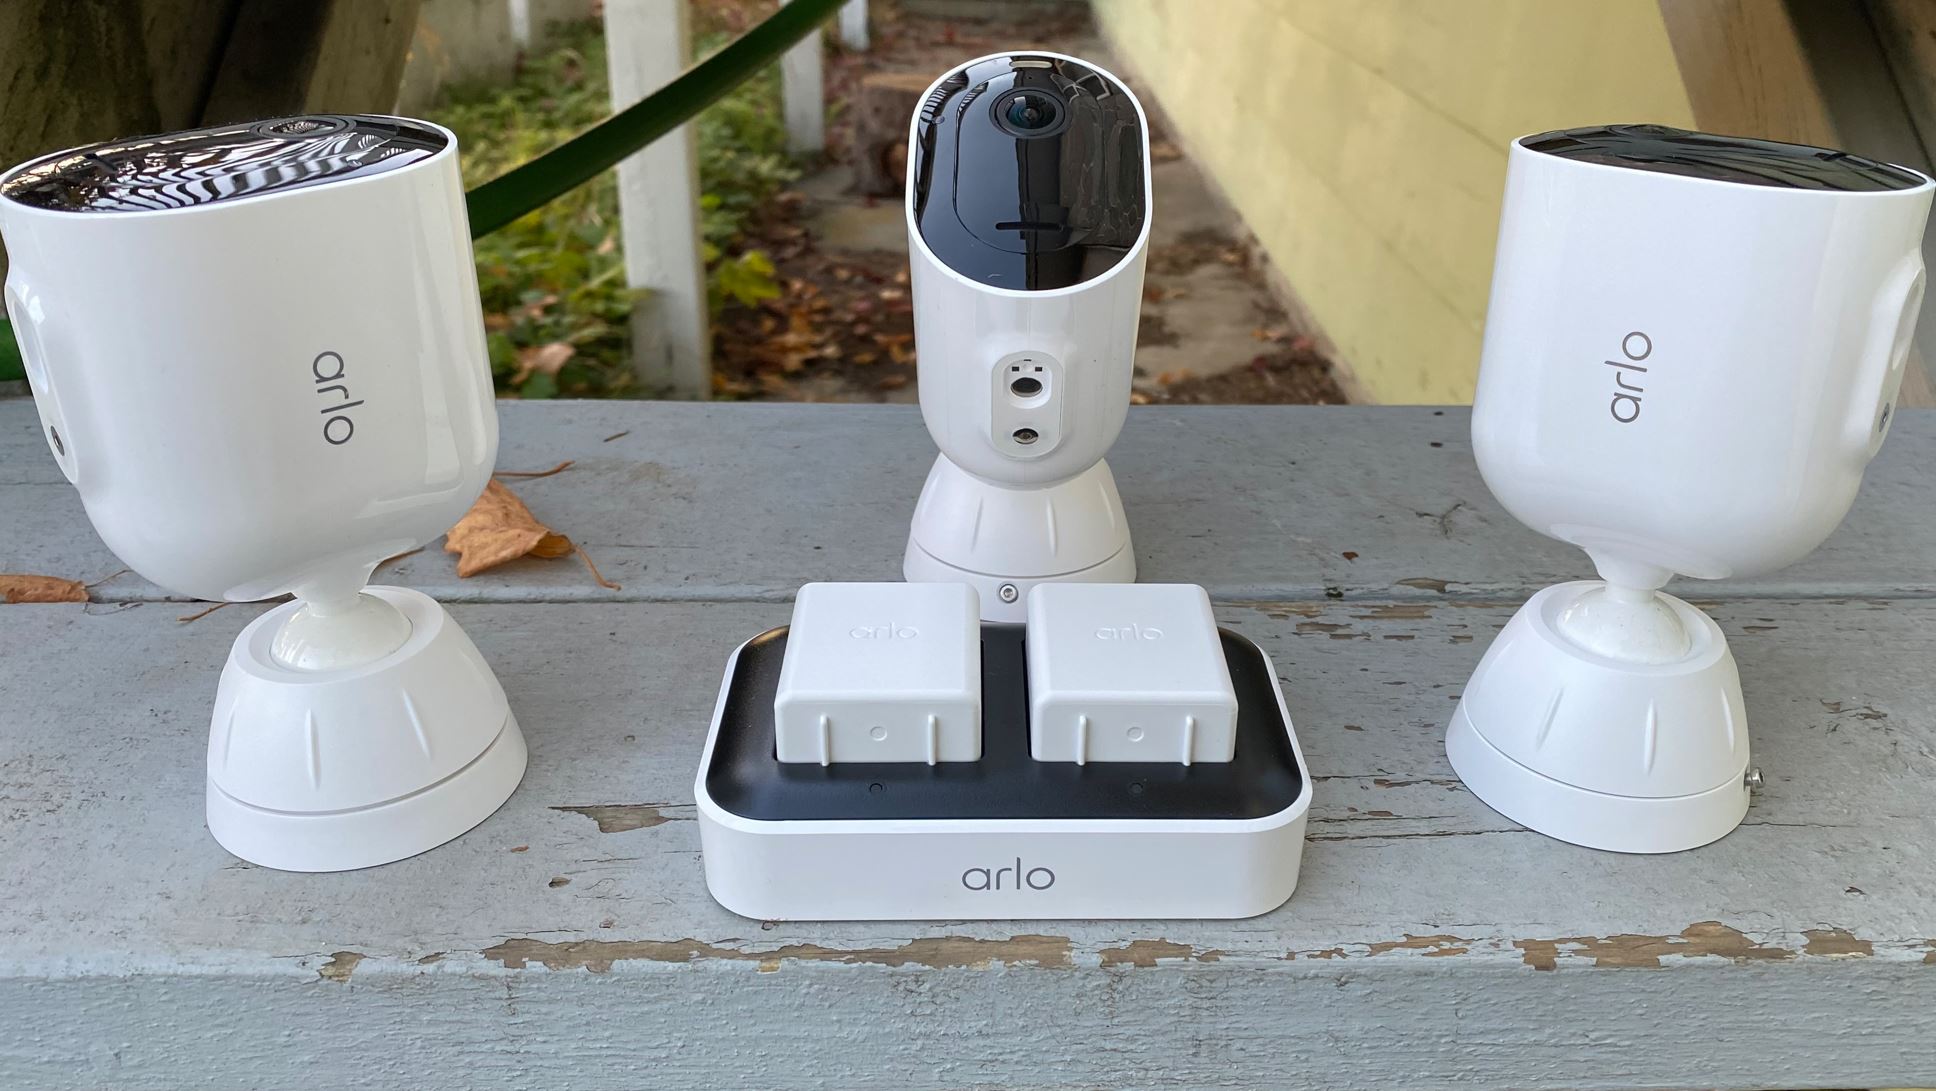 Arlo Security camera trio alongside the battery charging pack outdoors